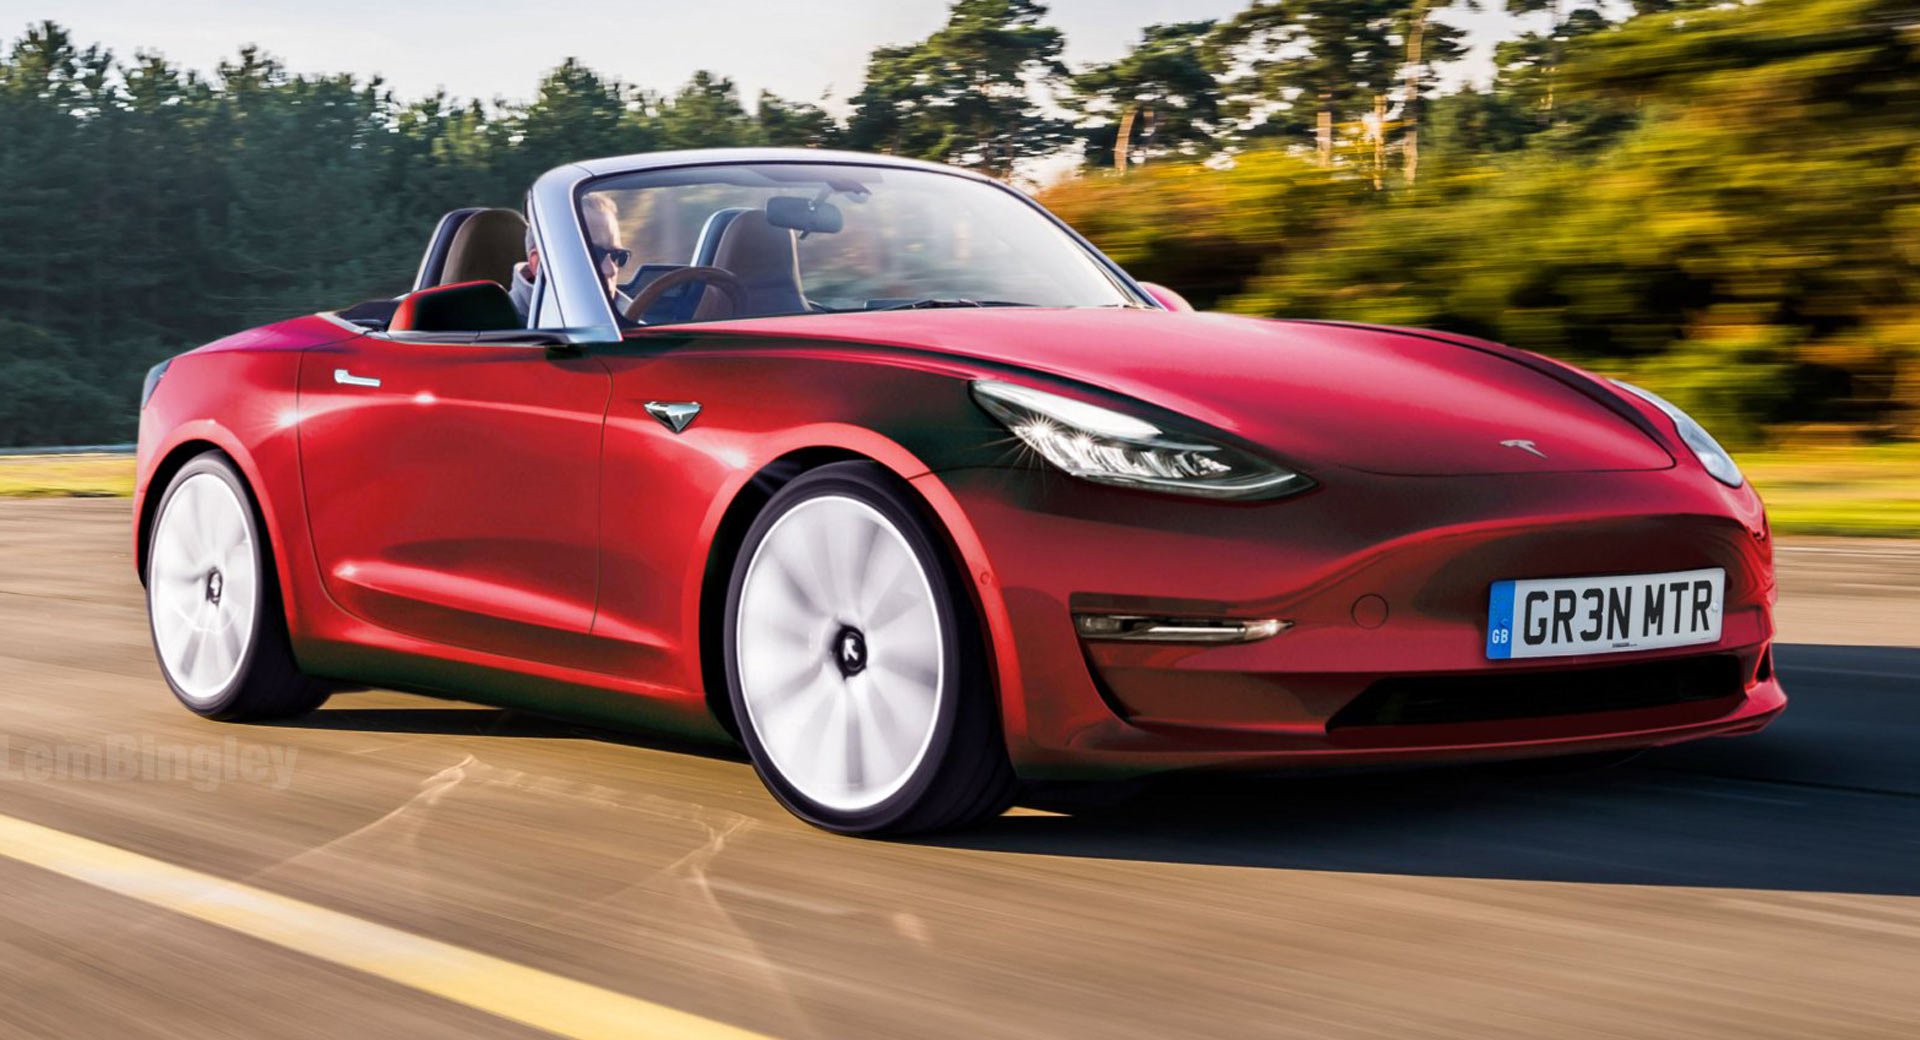 A Mazda Miata-Rivalling Electric Sports Car From Tesla Could Be A Runaway Success